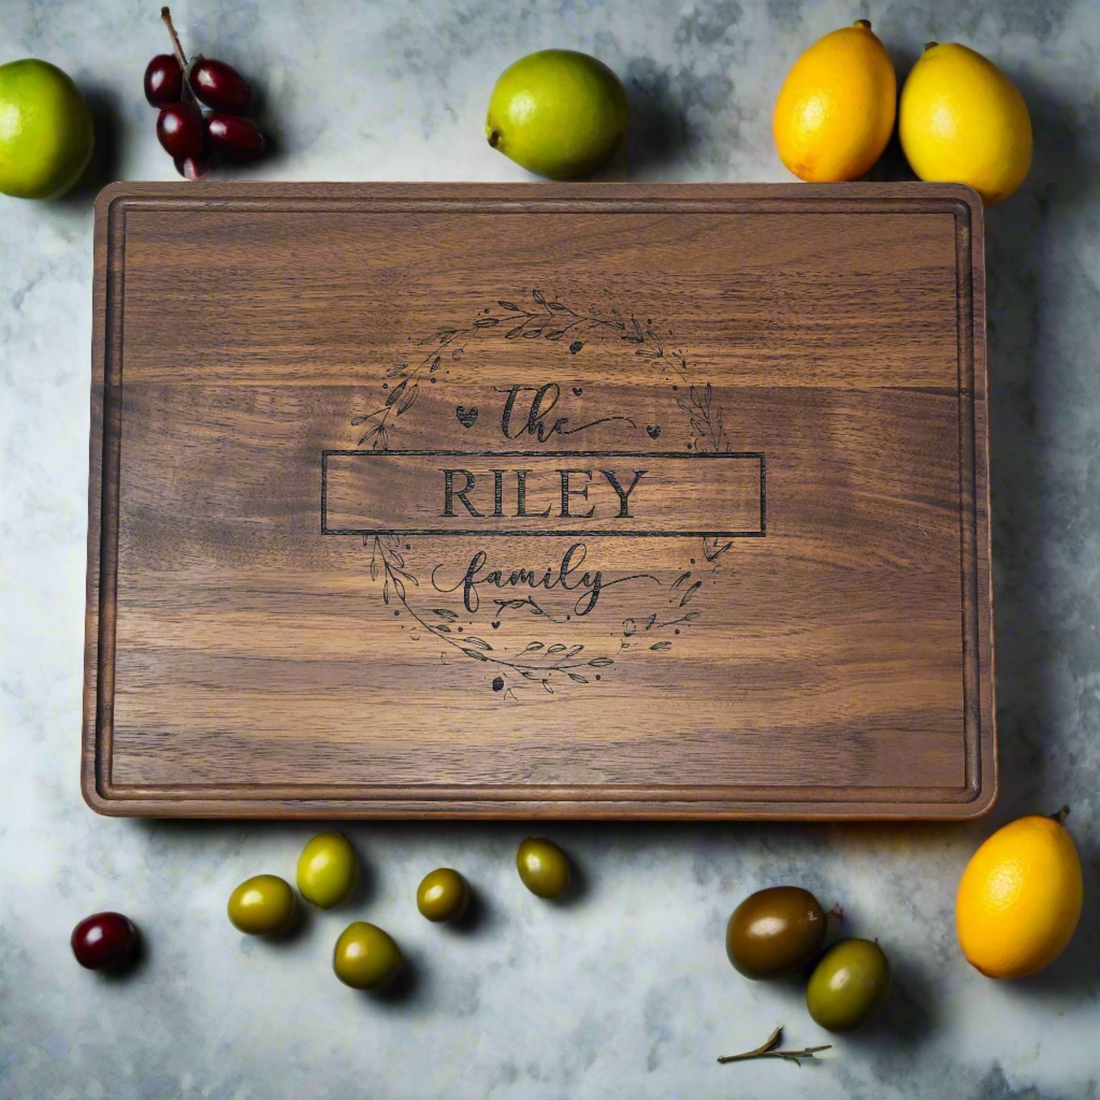 Personalized Walnut Cutting Board: The Perfect Gift for Every Occasion